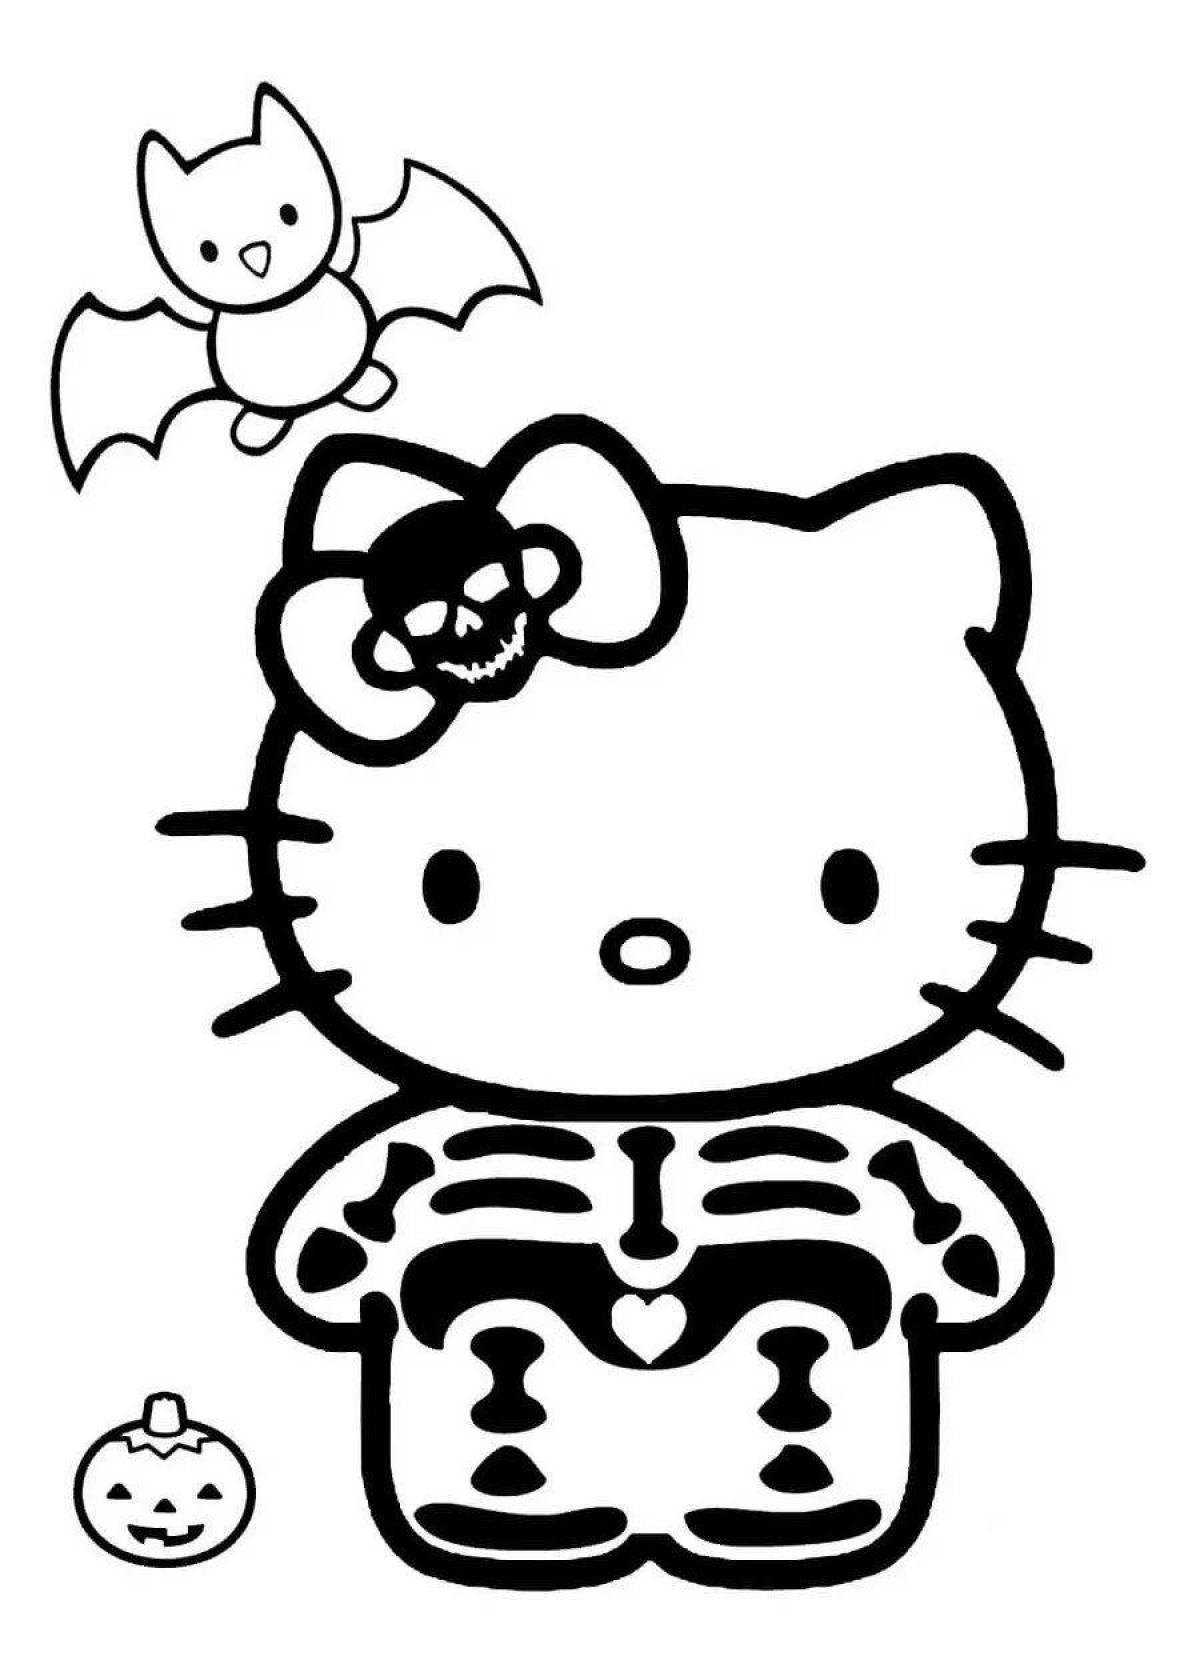 Great hello kitty coloring book in black and white